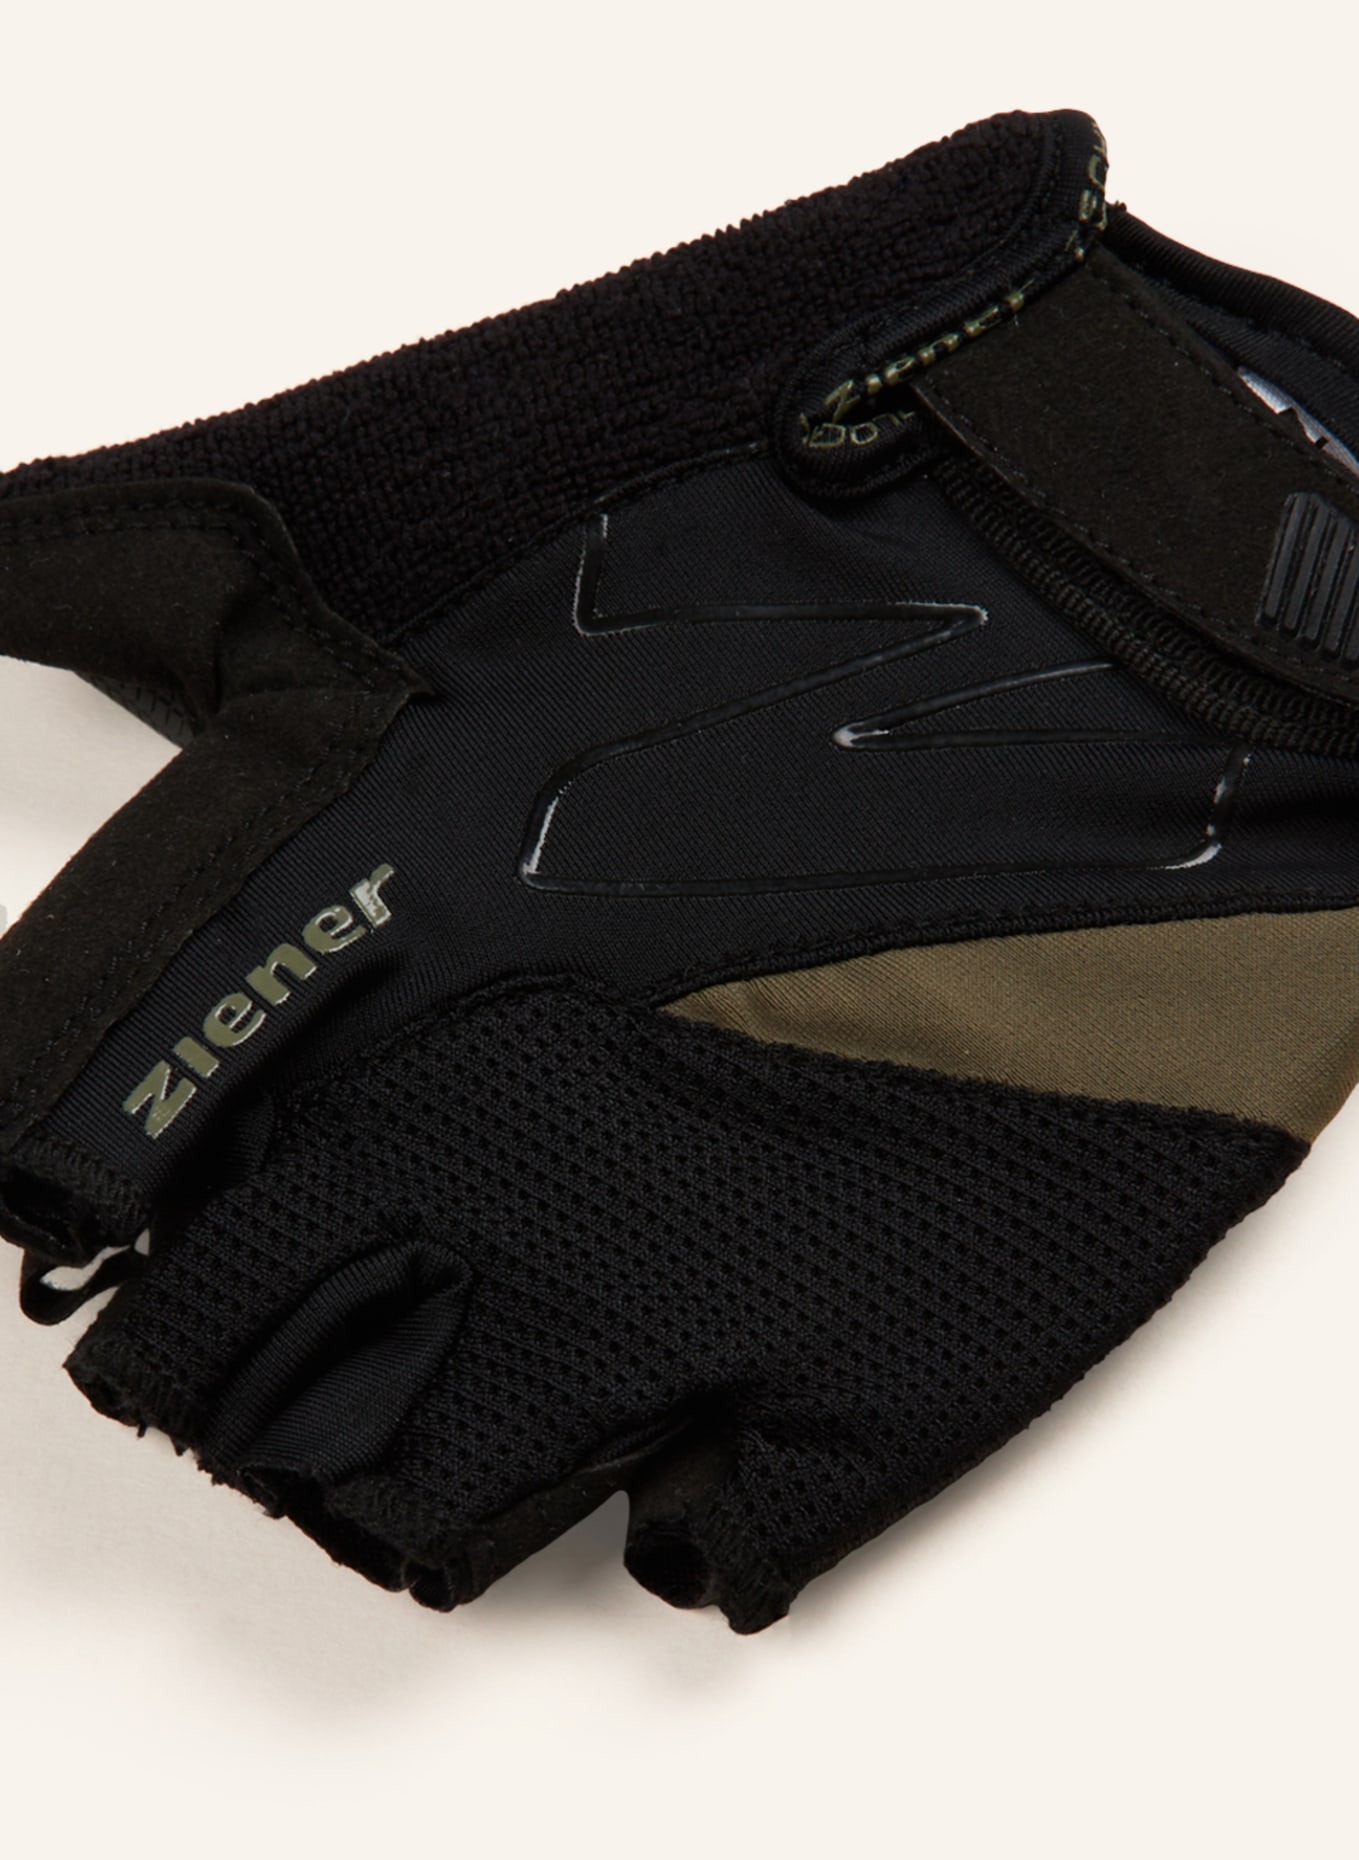 CRAVE in black/ gloves Cycling ziener khaki